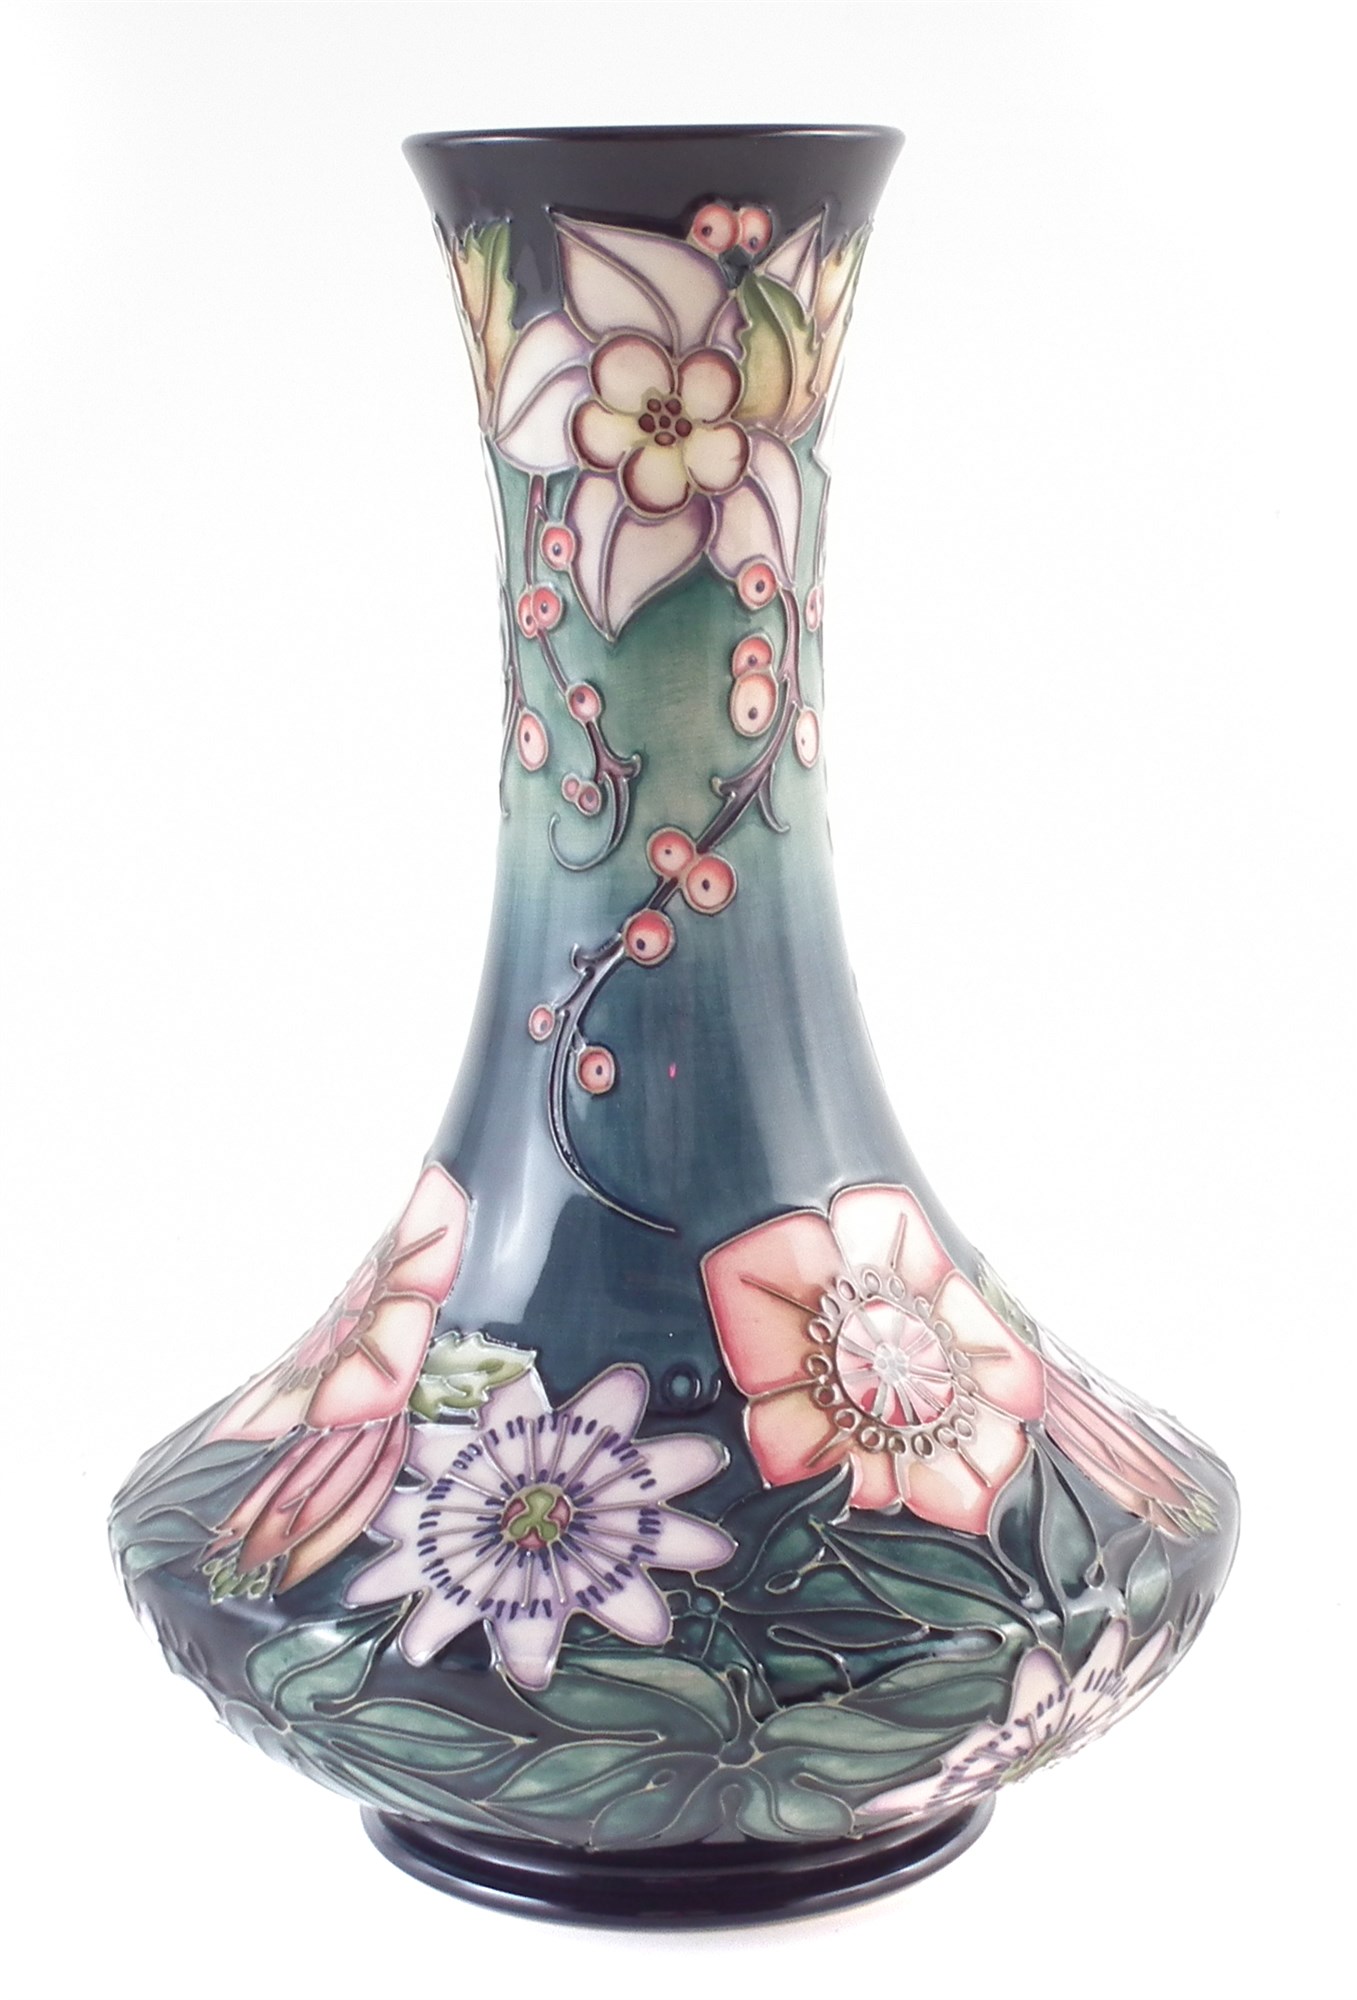 Moorcroft Carousel vase, after Rachel Bishop, numbered 671, with box, 28cm high For a condition